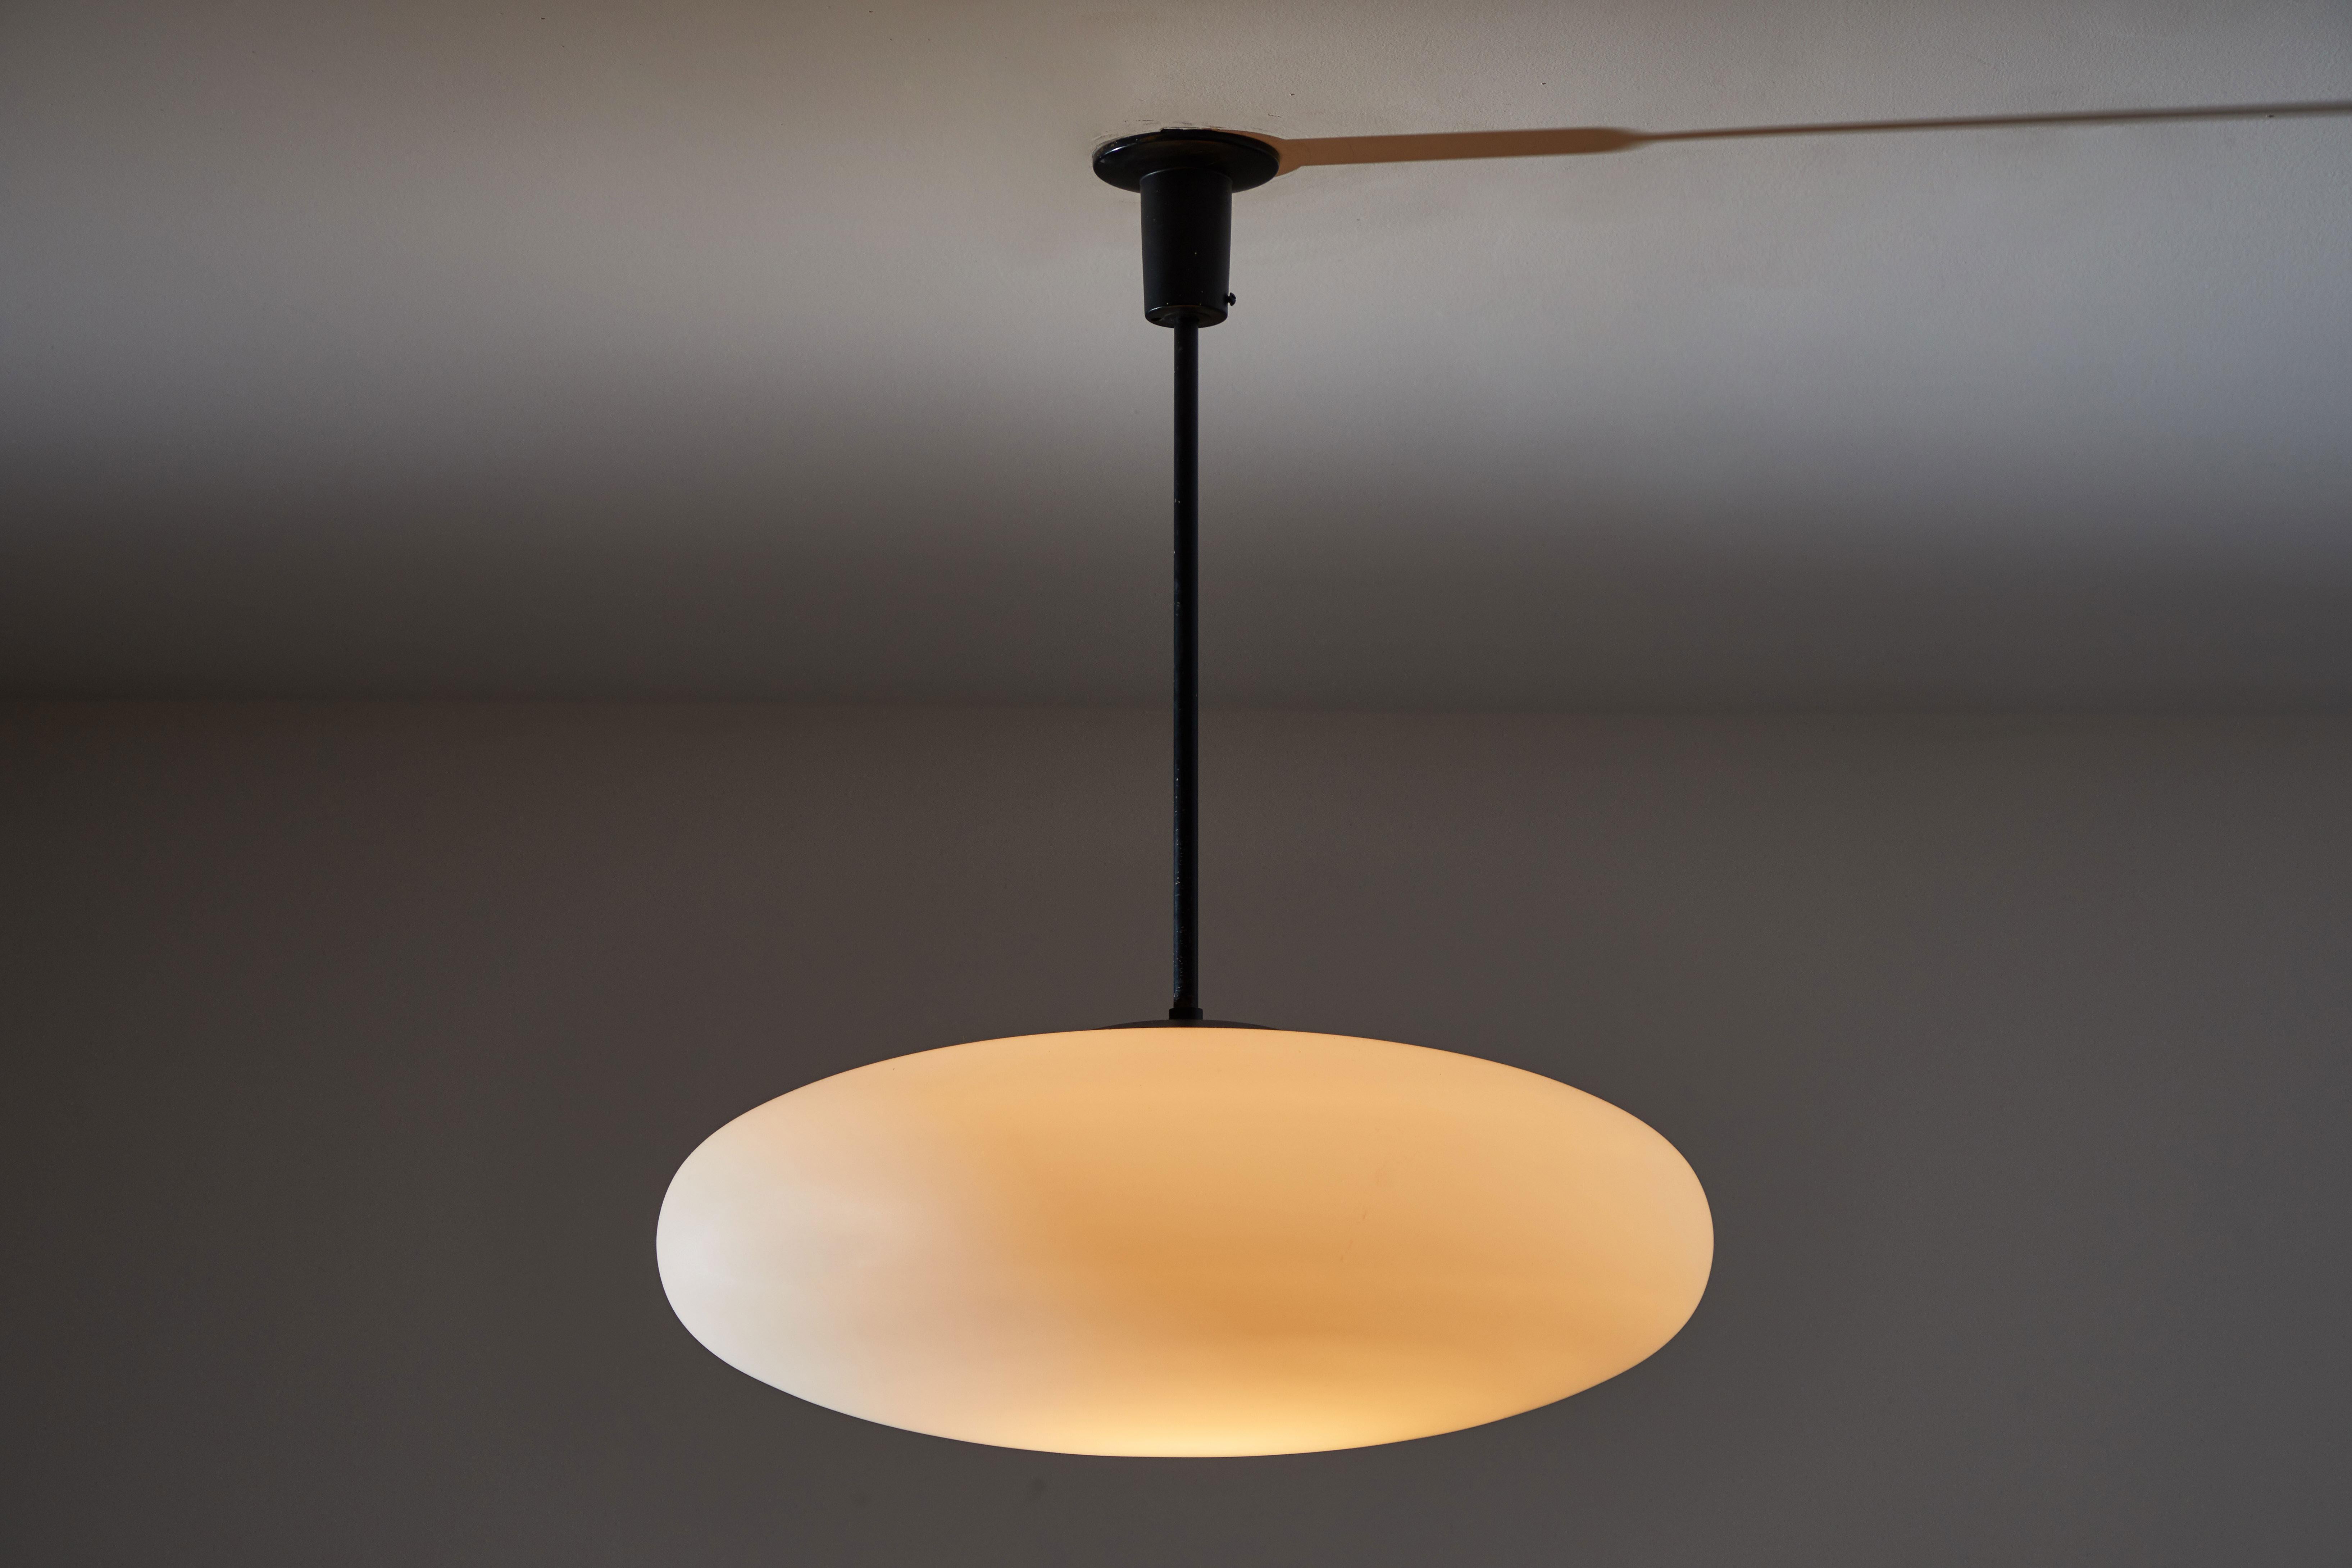 Pendant by Arredoluce. Manufactured in Italy, circa 1950s. Brushed satin glass diffuser, blackened steel hardware. Rewired for US junction boxes. Custom canopy. Takes one E27 100w maximum bulb.